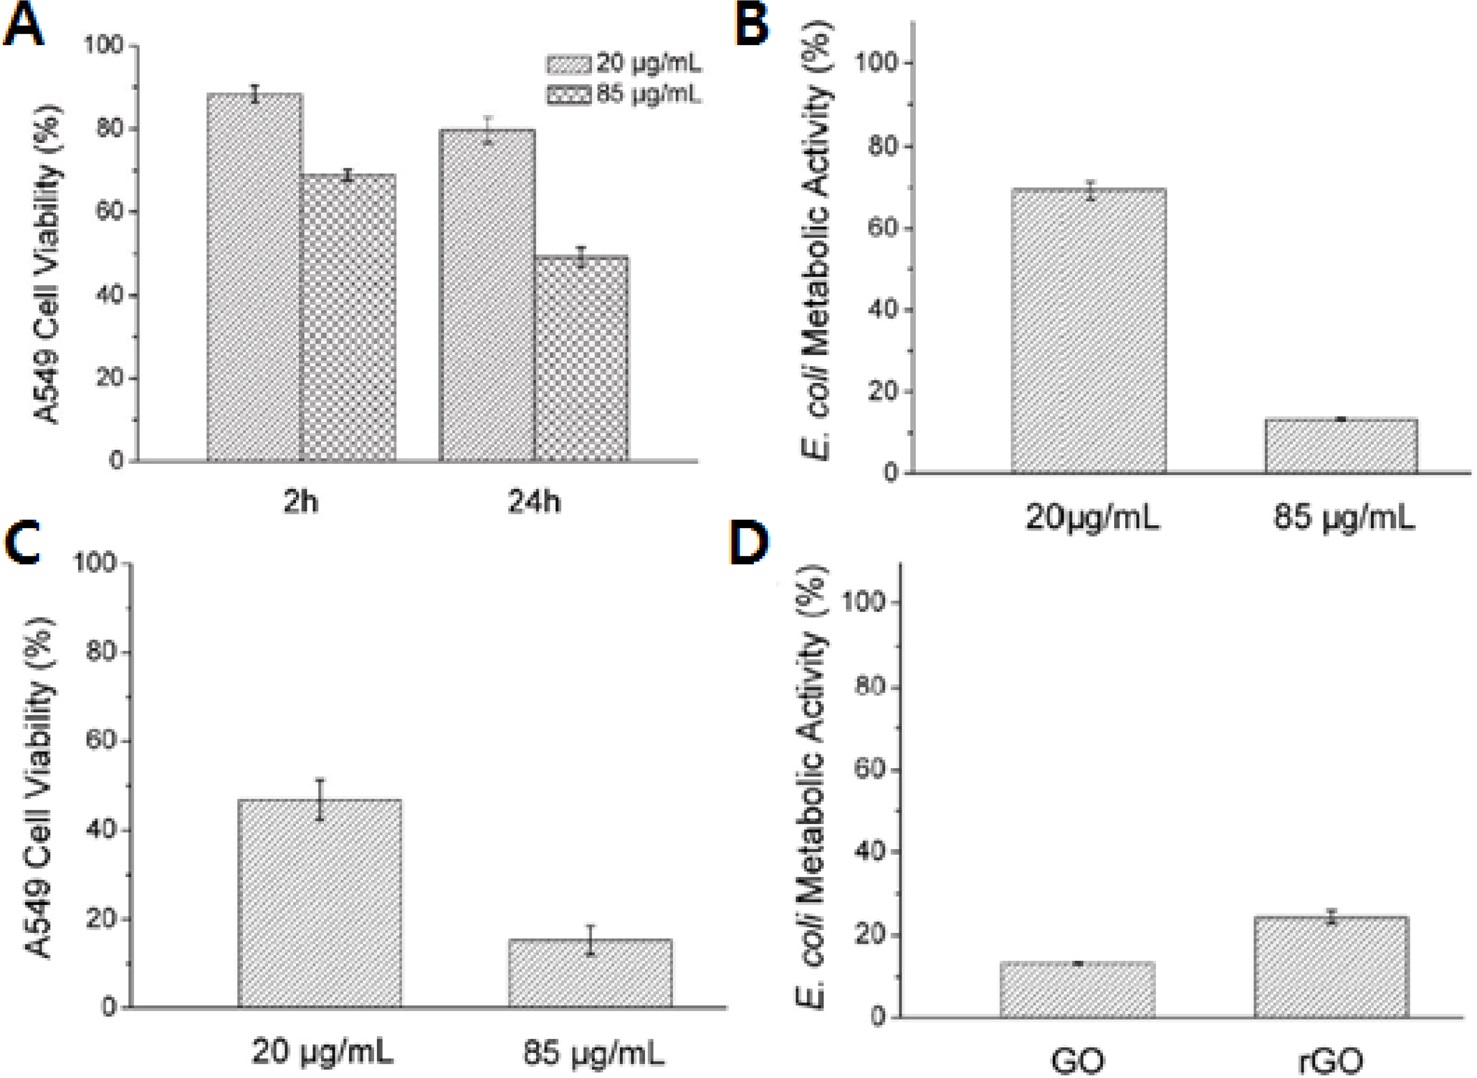 (a) Viability of A549 cells incubated with 20 and 85 μg/mL graphene oxide (GO) nanosheets for 2 h and 24 h, (b) metabolic activity of Escherichia coli incubation with 20 and 85 μg/mL GO nanosheets at 37℃ for 2 h, (c) viability of A549 cell incubated with 20 and 85 μg/mL reduced GO (RGO) nanosheets, (d) metabolic activity of E. coli treated with 85 μg/mL GO and RGO nano-sheets [22].